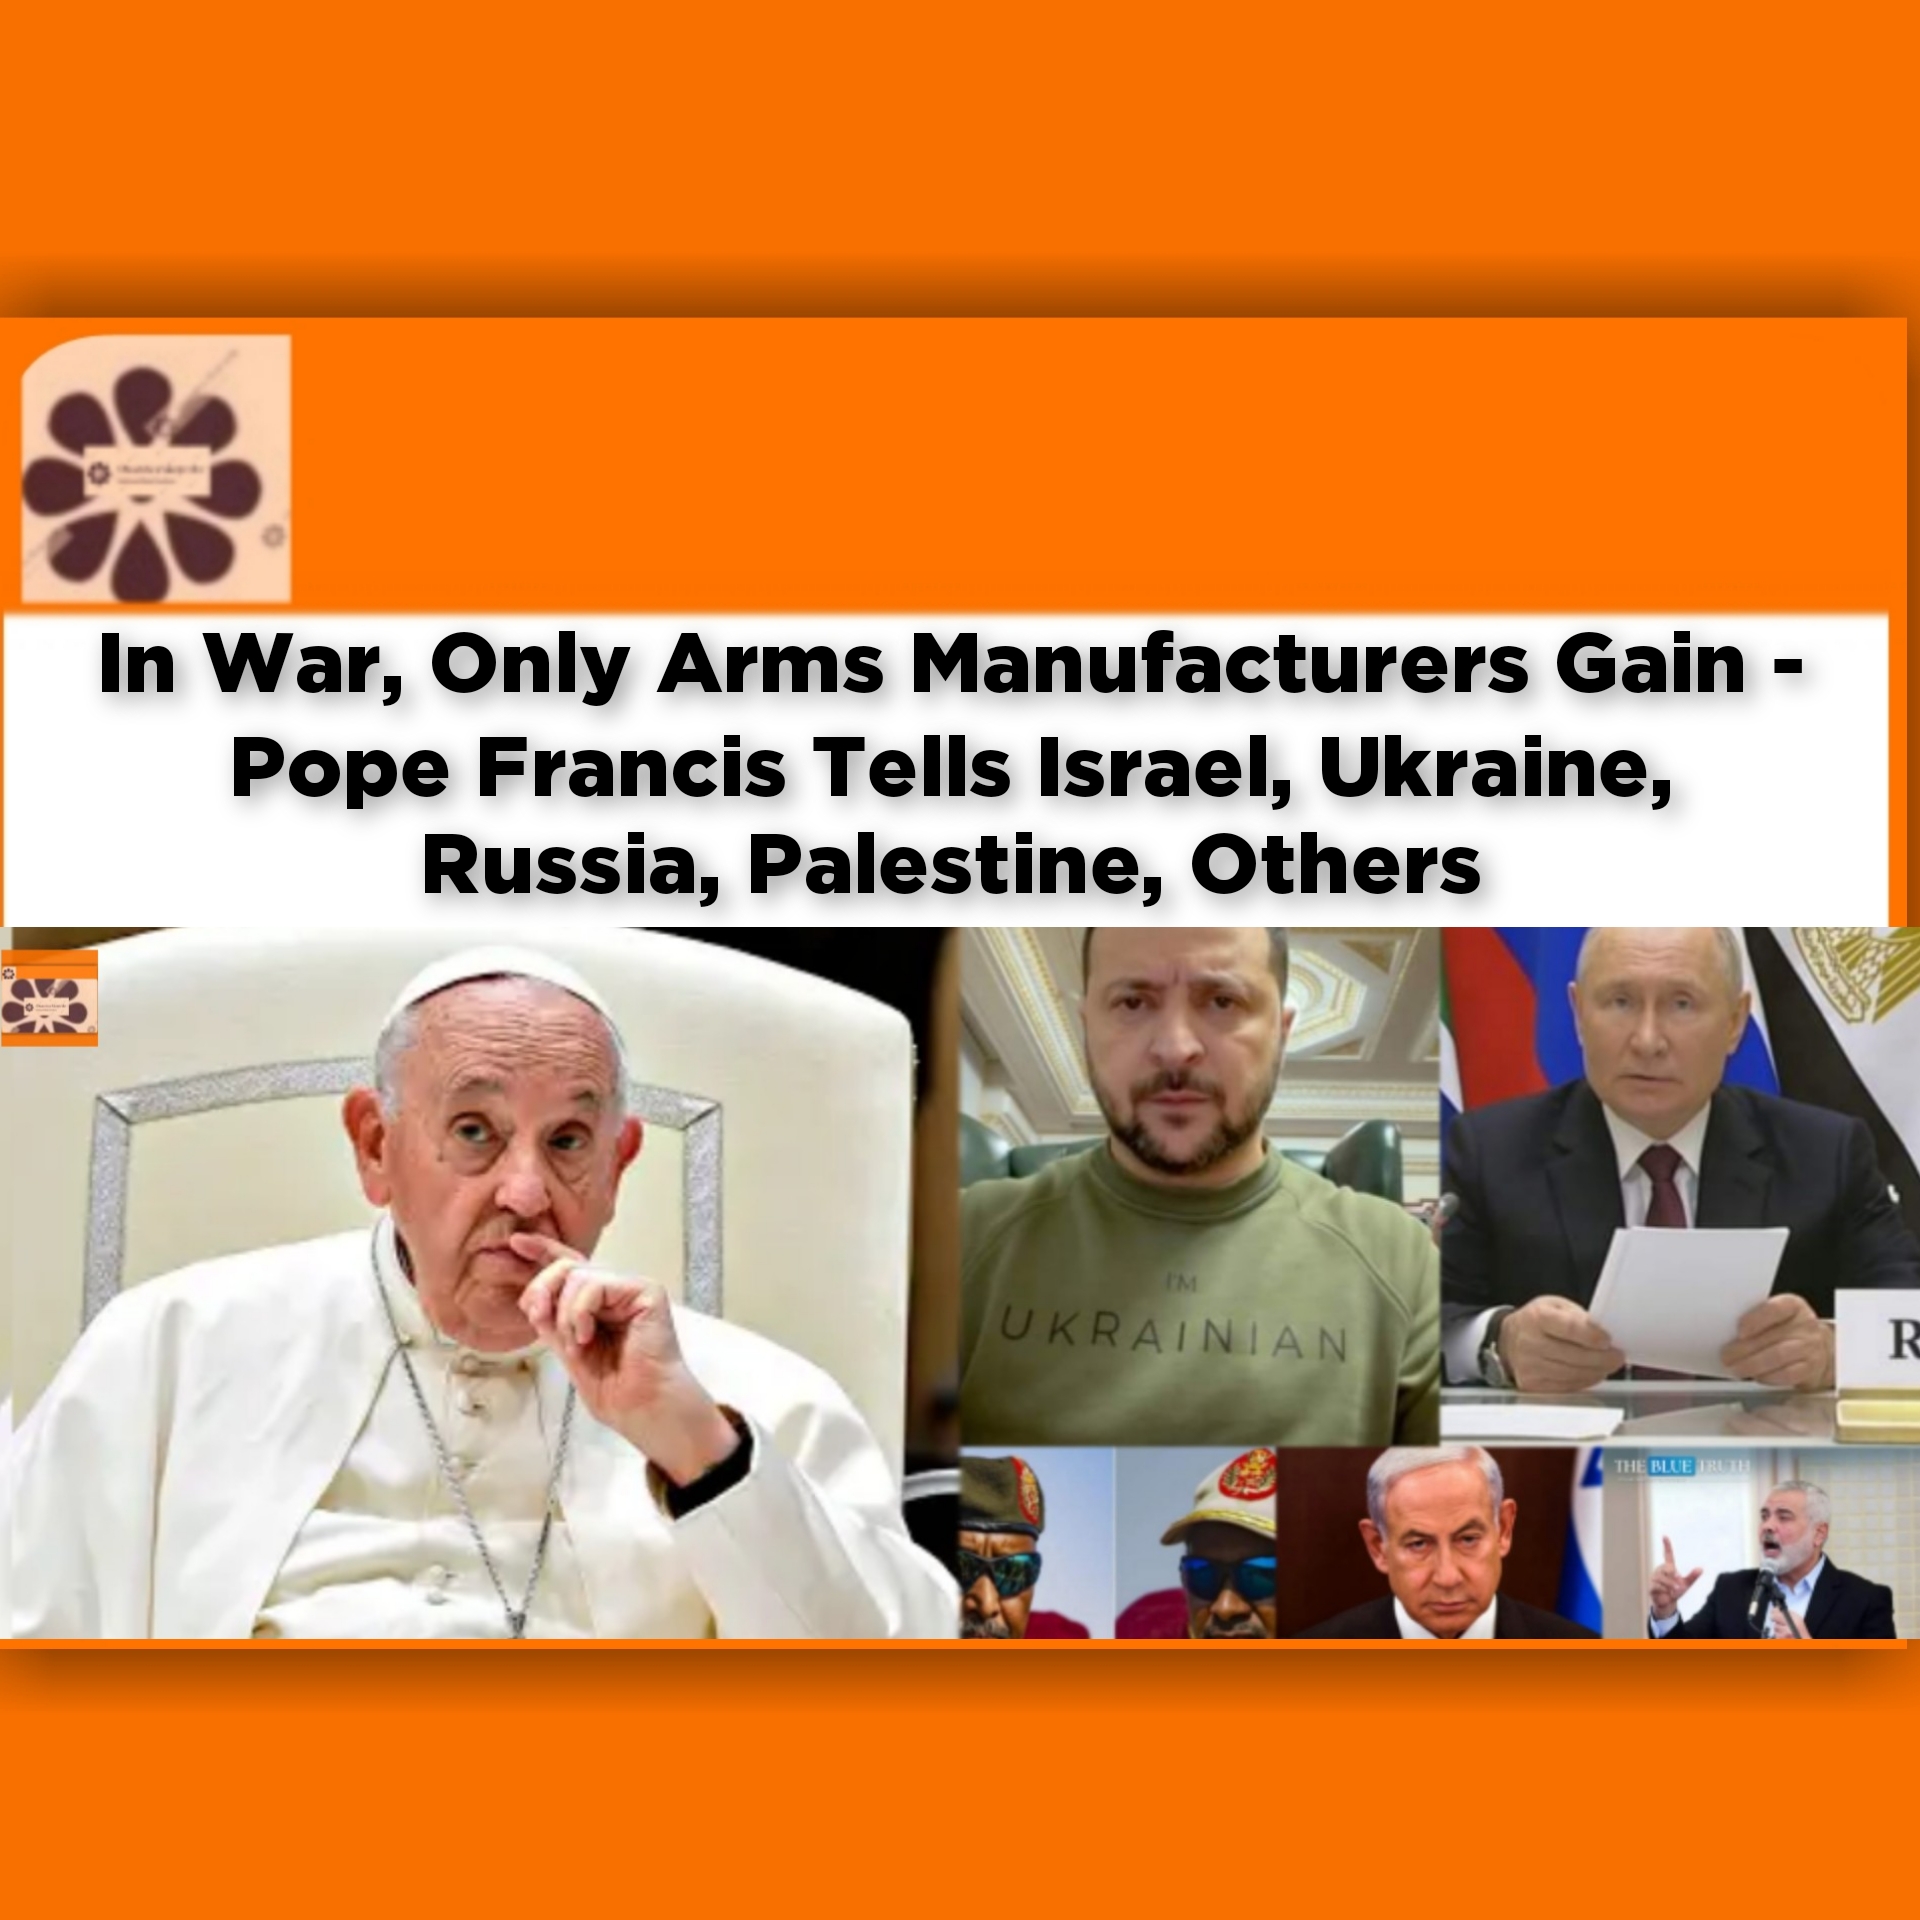 In War, Only Arms Manufacturers Gain - Pope Francis Tells Israel, Ukraine, Russia, Palestine, Others ~ OsazuwaAkonedo #Catholic